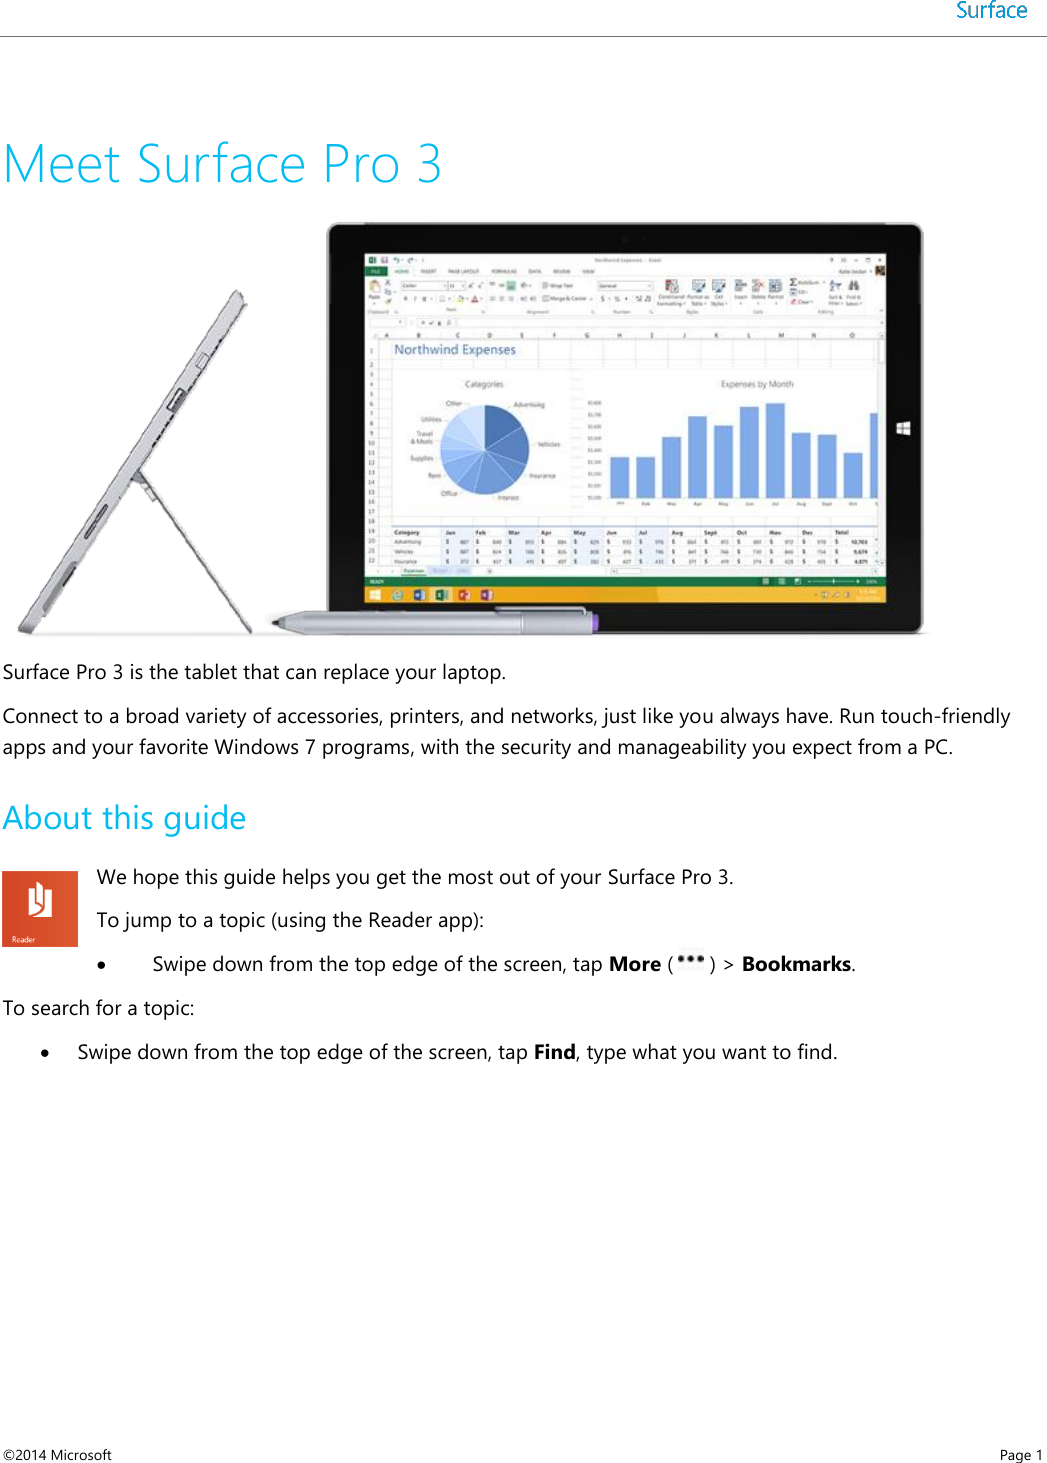  ©2014 Microsoft    Page 1  Meet Surface Pro 3   Surface Pro 3 is the tablet that can replace your laptop. Connect to a broad variety of accessories, printers, and networks, just like you always have. Run touch-friendly apps and your favorite Windows 7 programs, with the security and manageability you expect from a PC.  About this guide We hope this guide helps you get the most out of your Surface Pro 3.  To jump to a topic (using the Reader app):  Swipe down from the top edge of the screen, tap More (   ) &gt; Bookmarks. To search for a topic:  Swipe down from the top edge of the screen, tap Find, type what you want to find. 